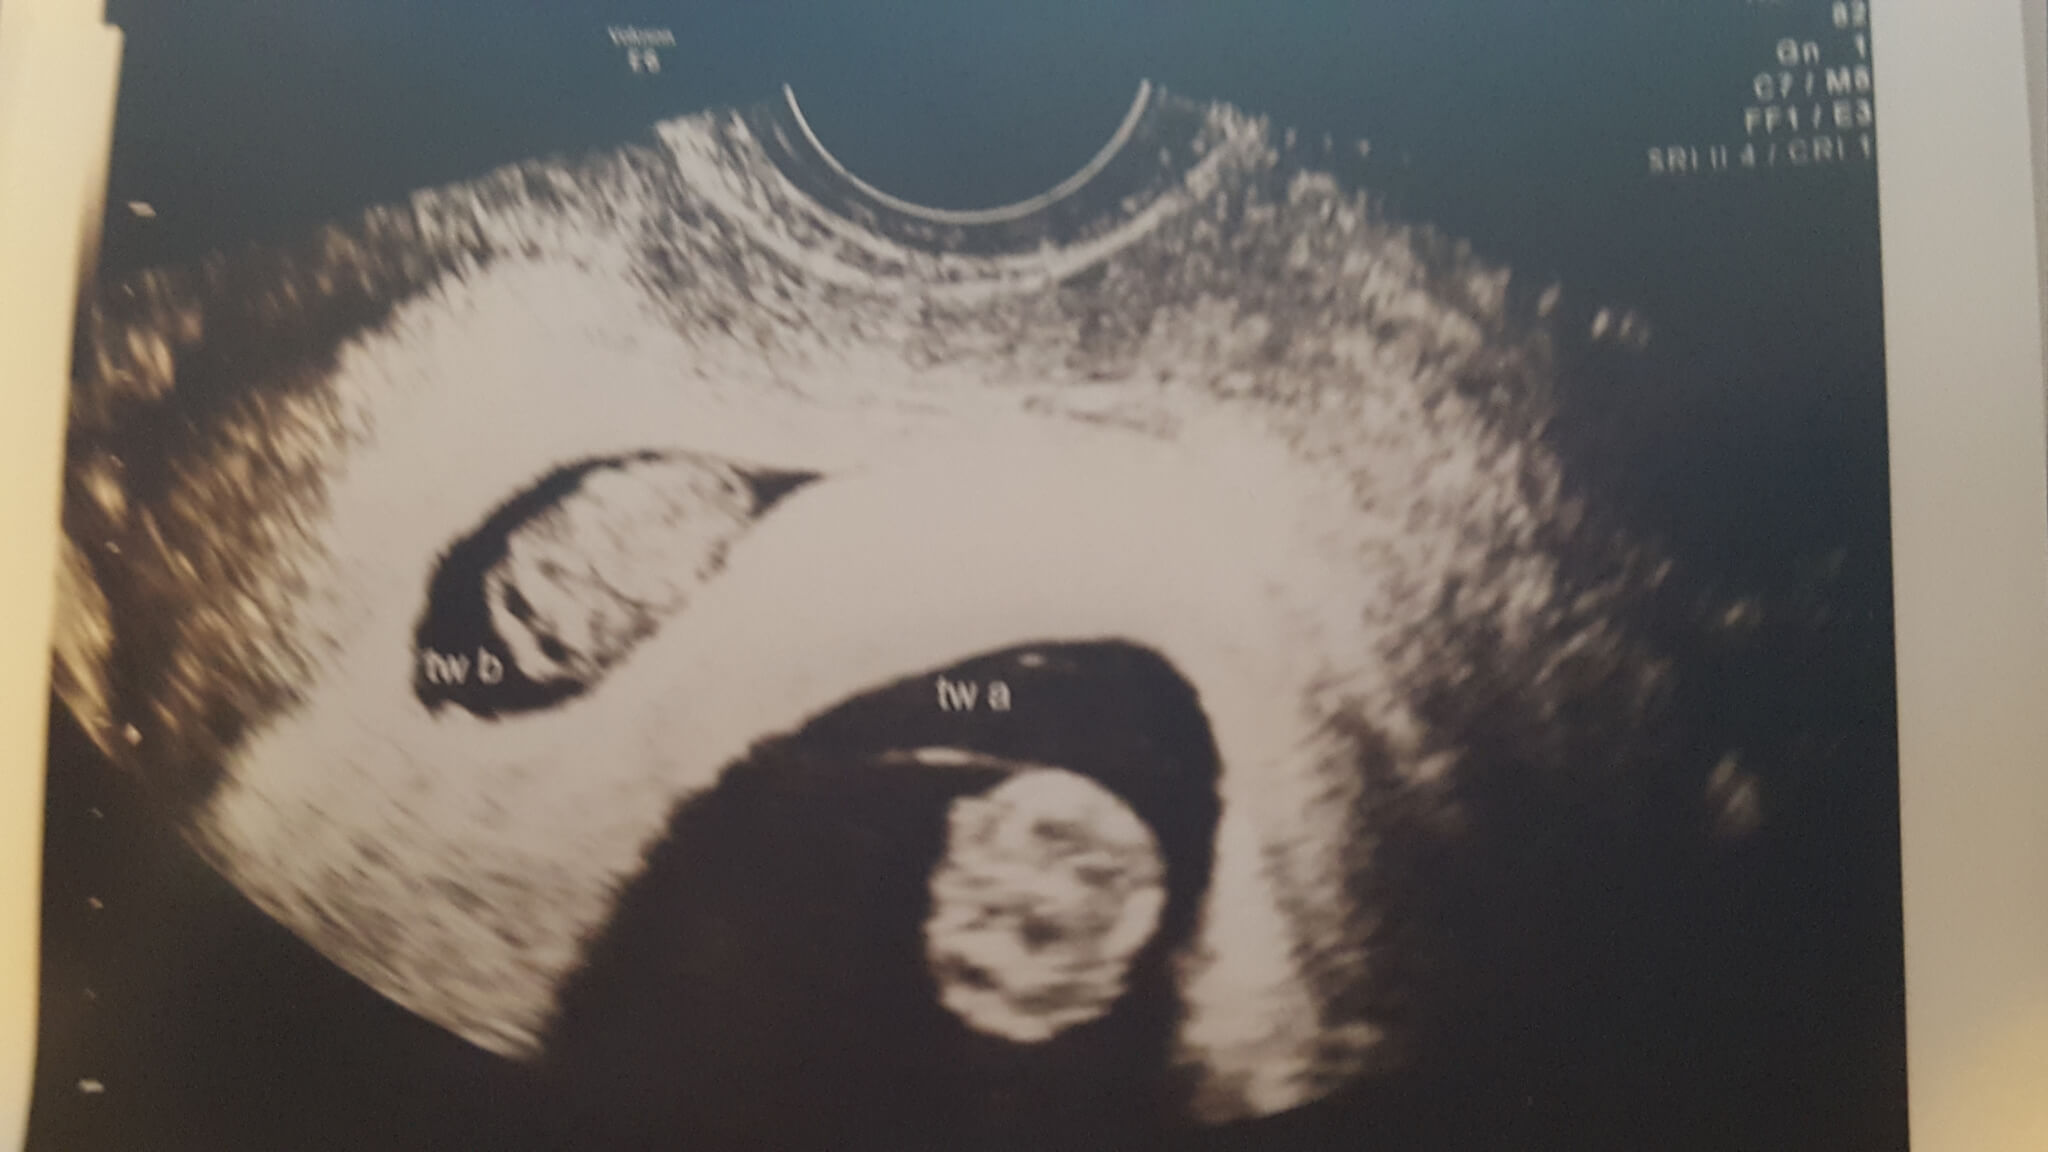 image of heather and brandon's ultrasound